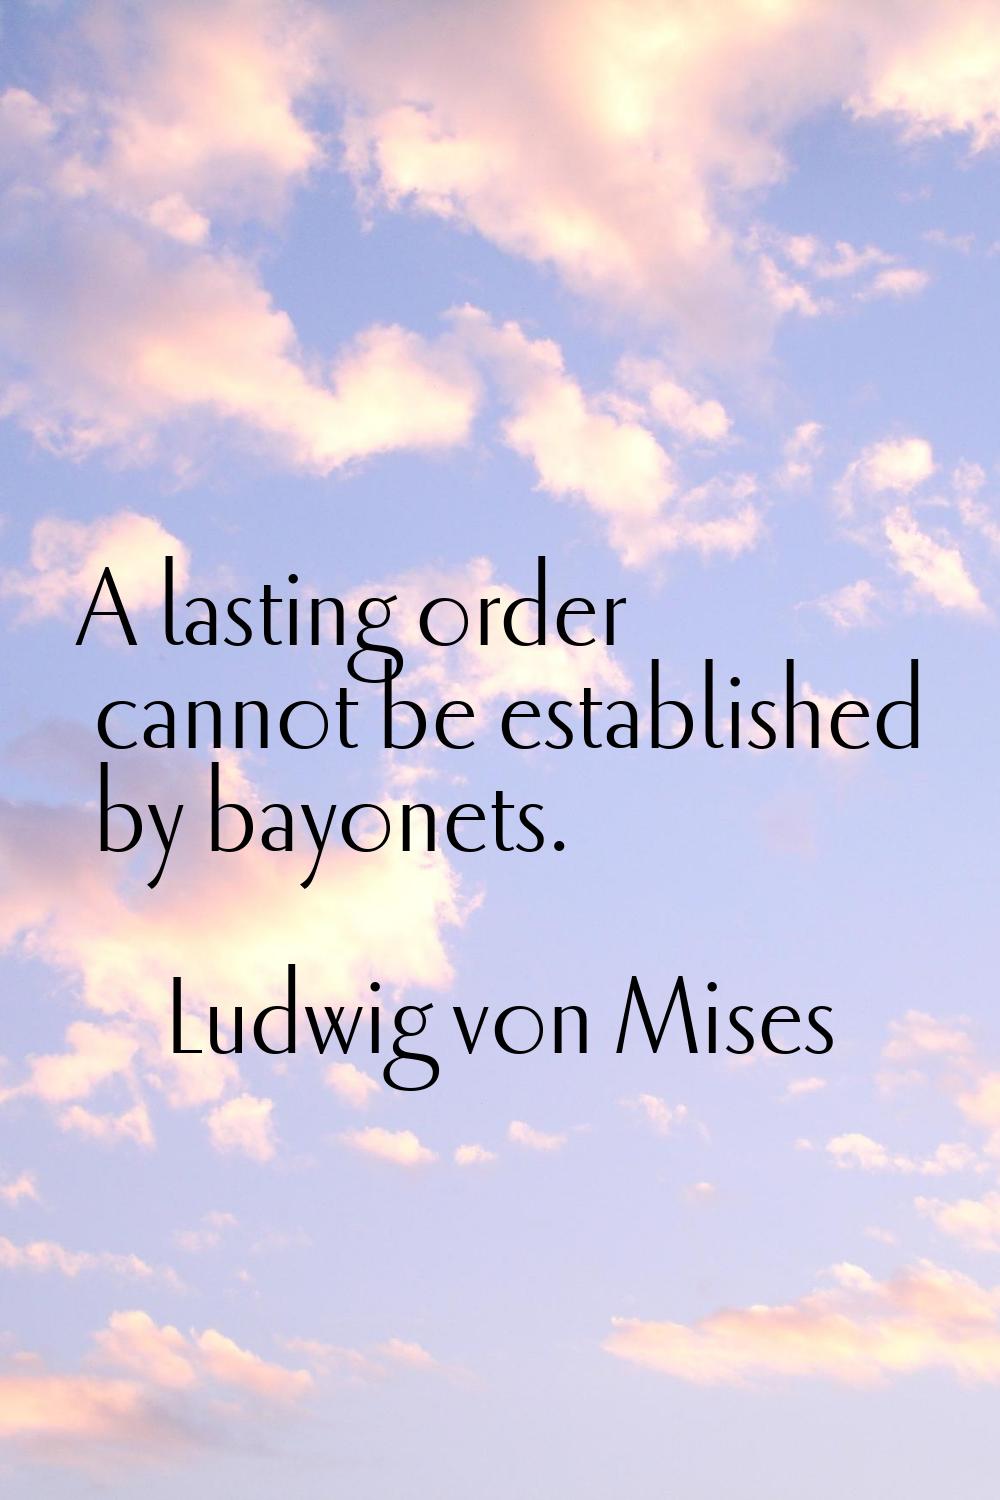 A lasting order cannot be established by bayonets.